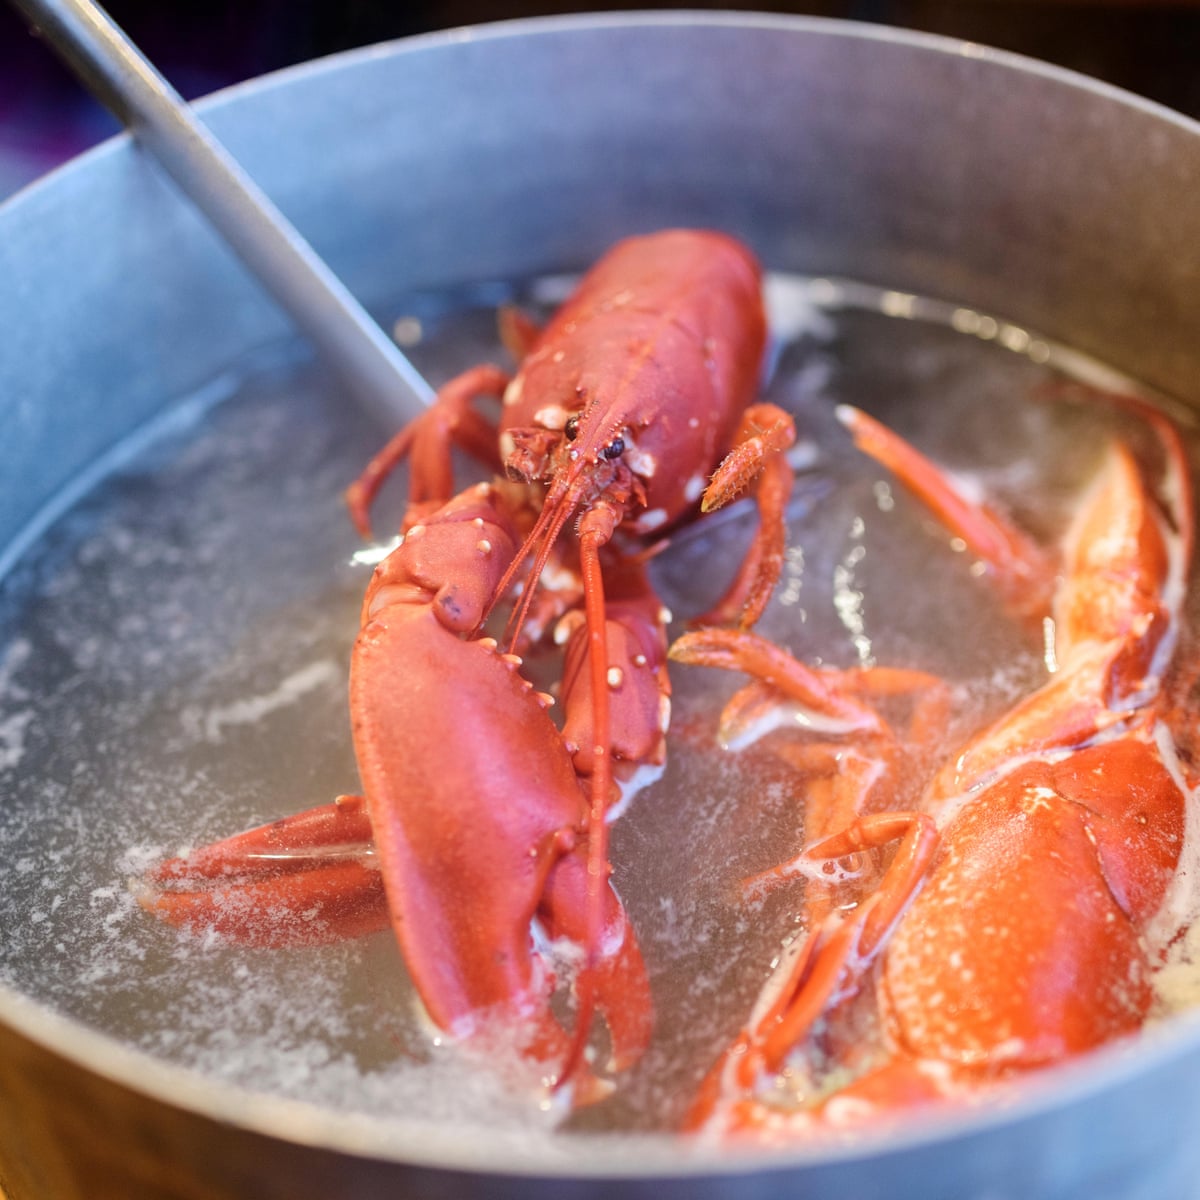 What is wrong with Red Lobster's lobster?